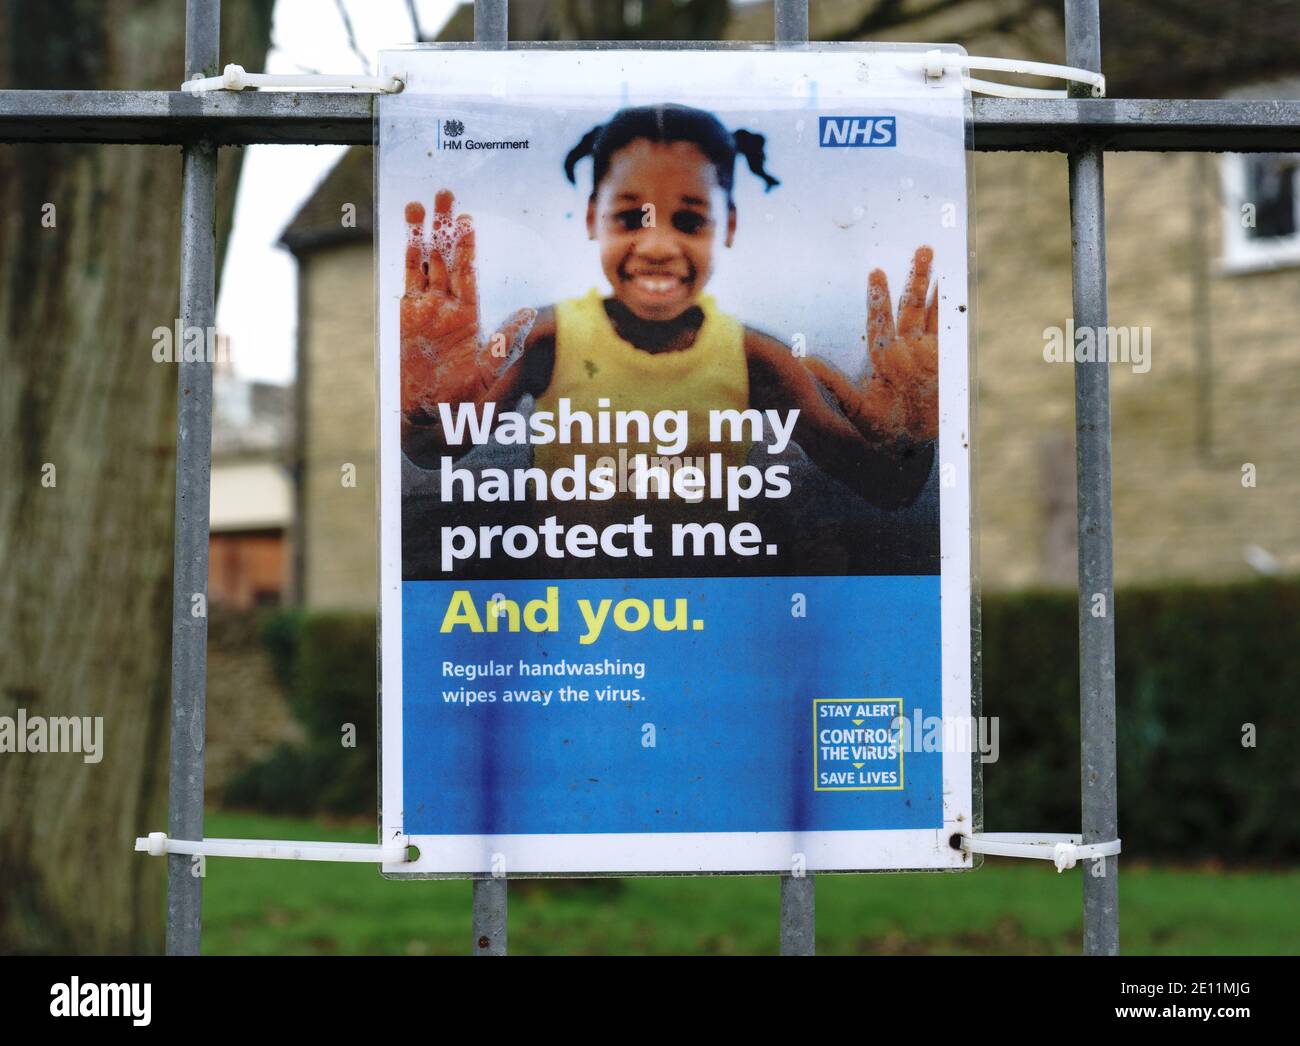 Signs advising on coronavirus spread and management attached to a school gate. 'Stop the spread' 'We're all responsible'. 'Walking hands'. Stock Photo